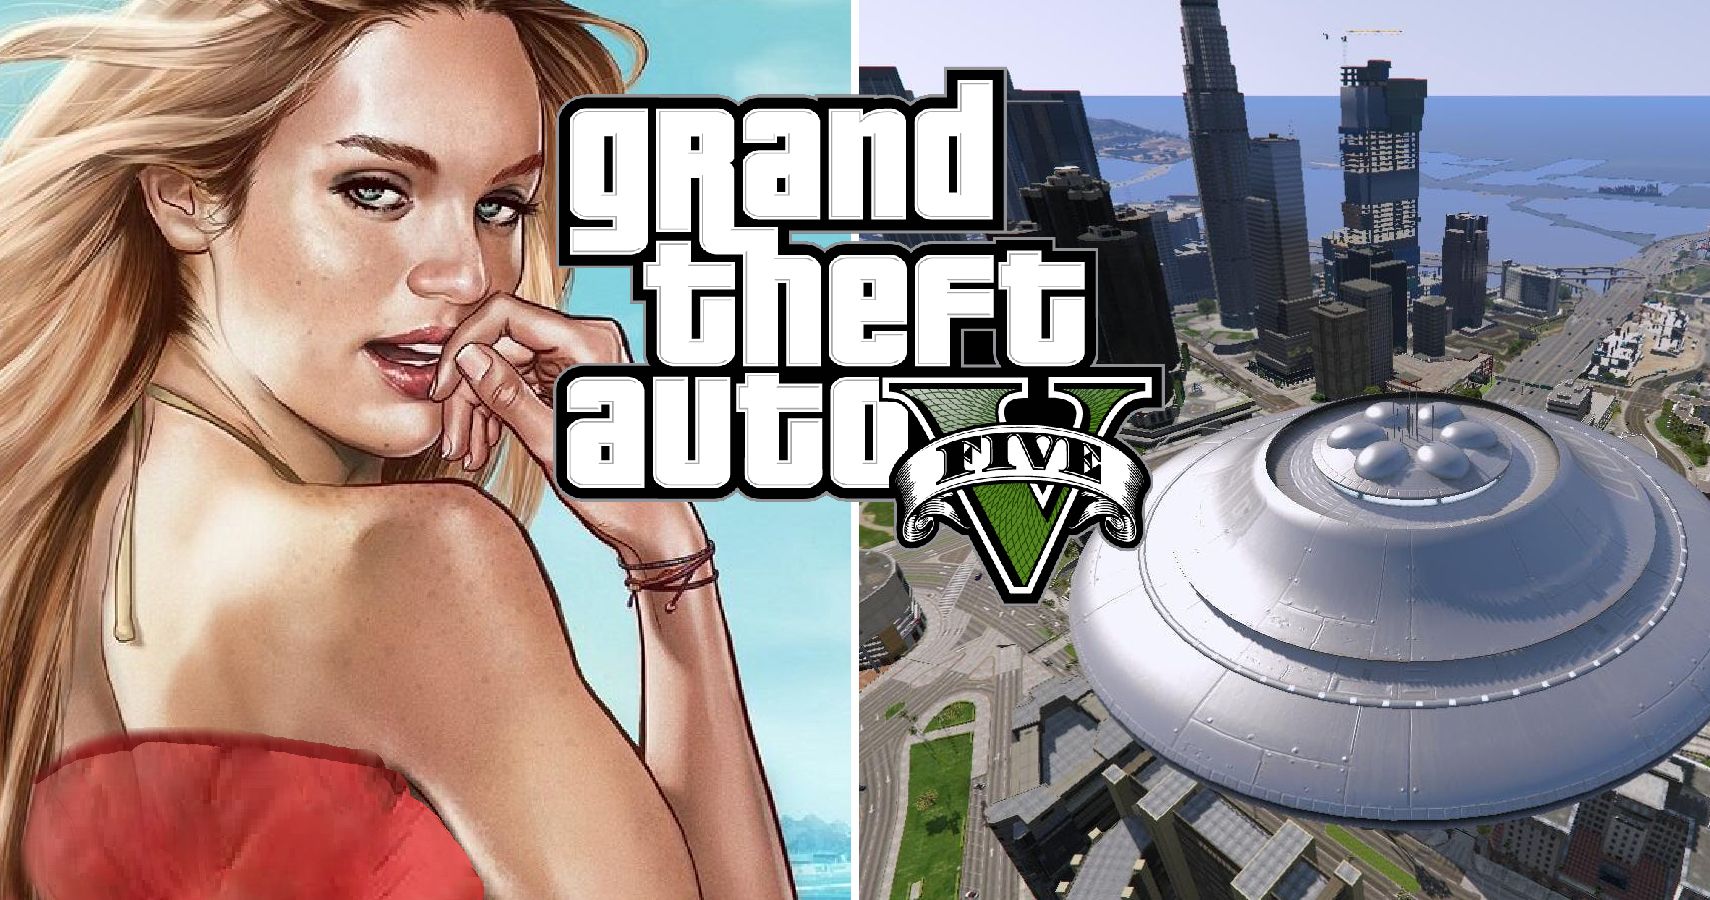 Conspiracy Theories About Grand Theft Auto V